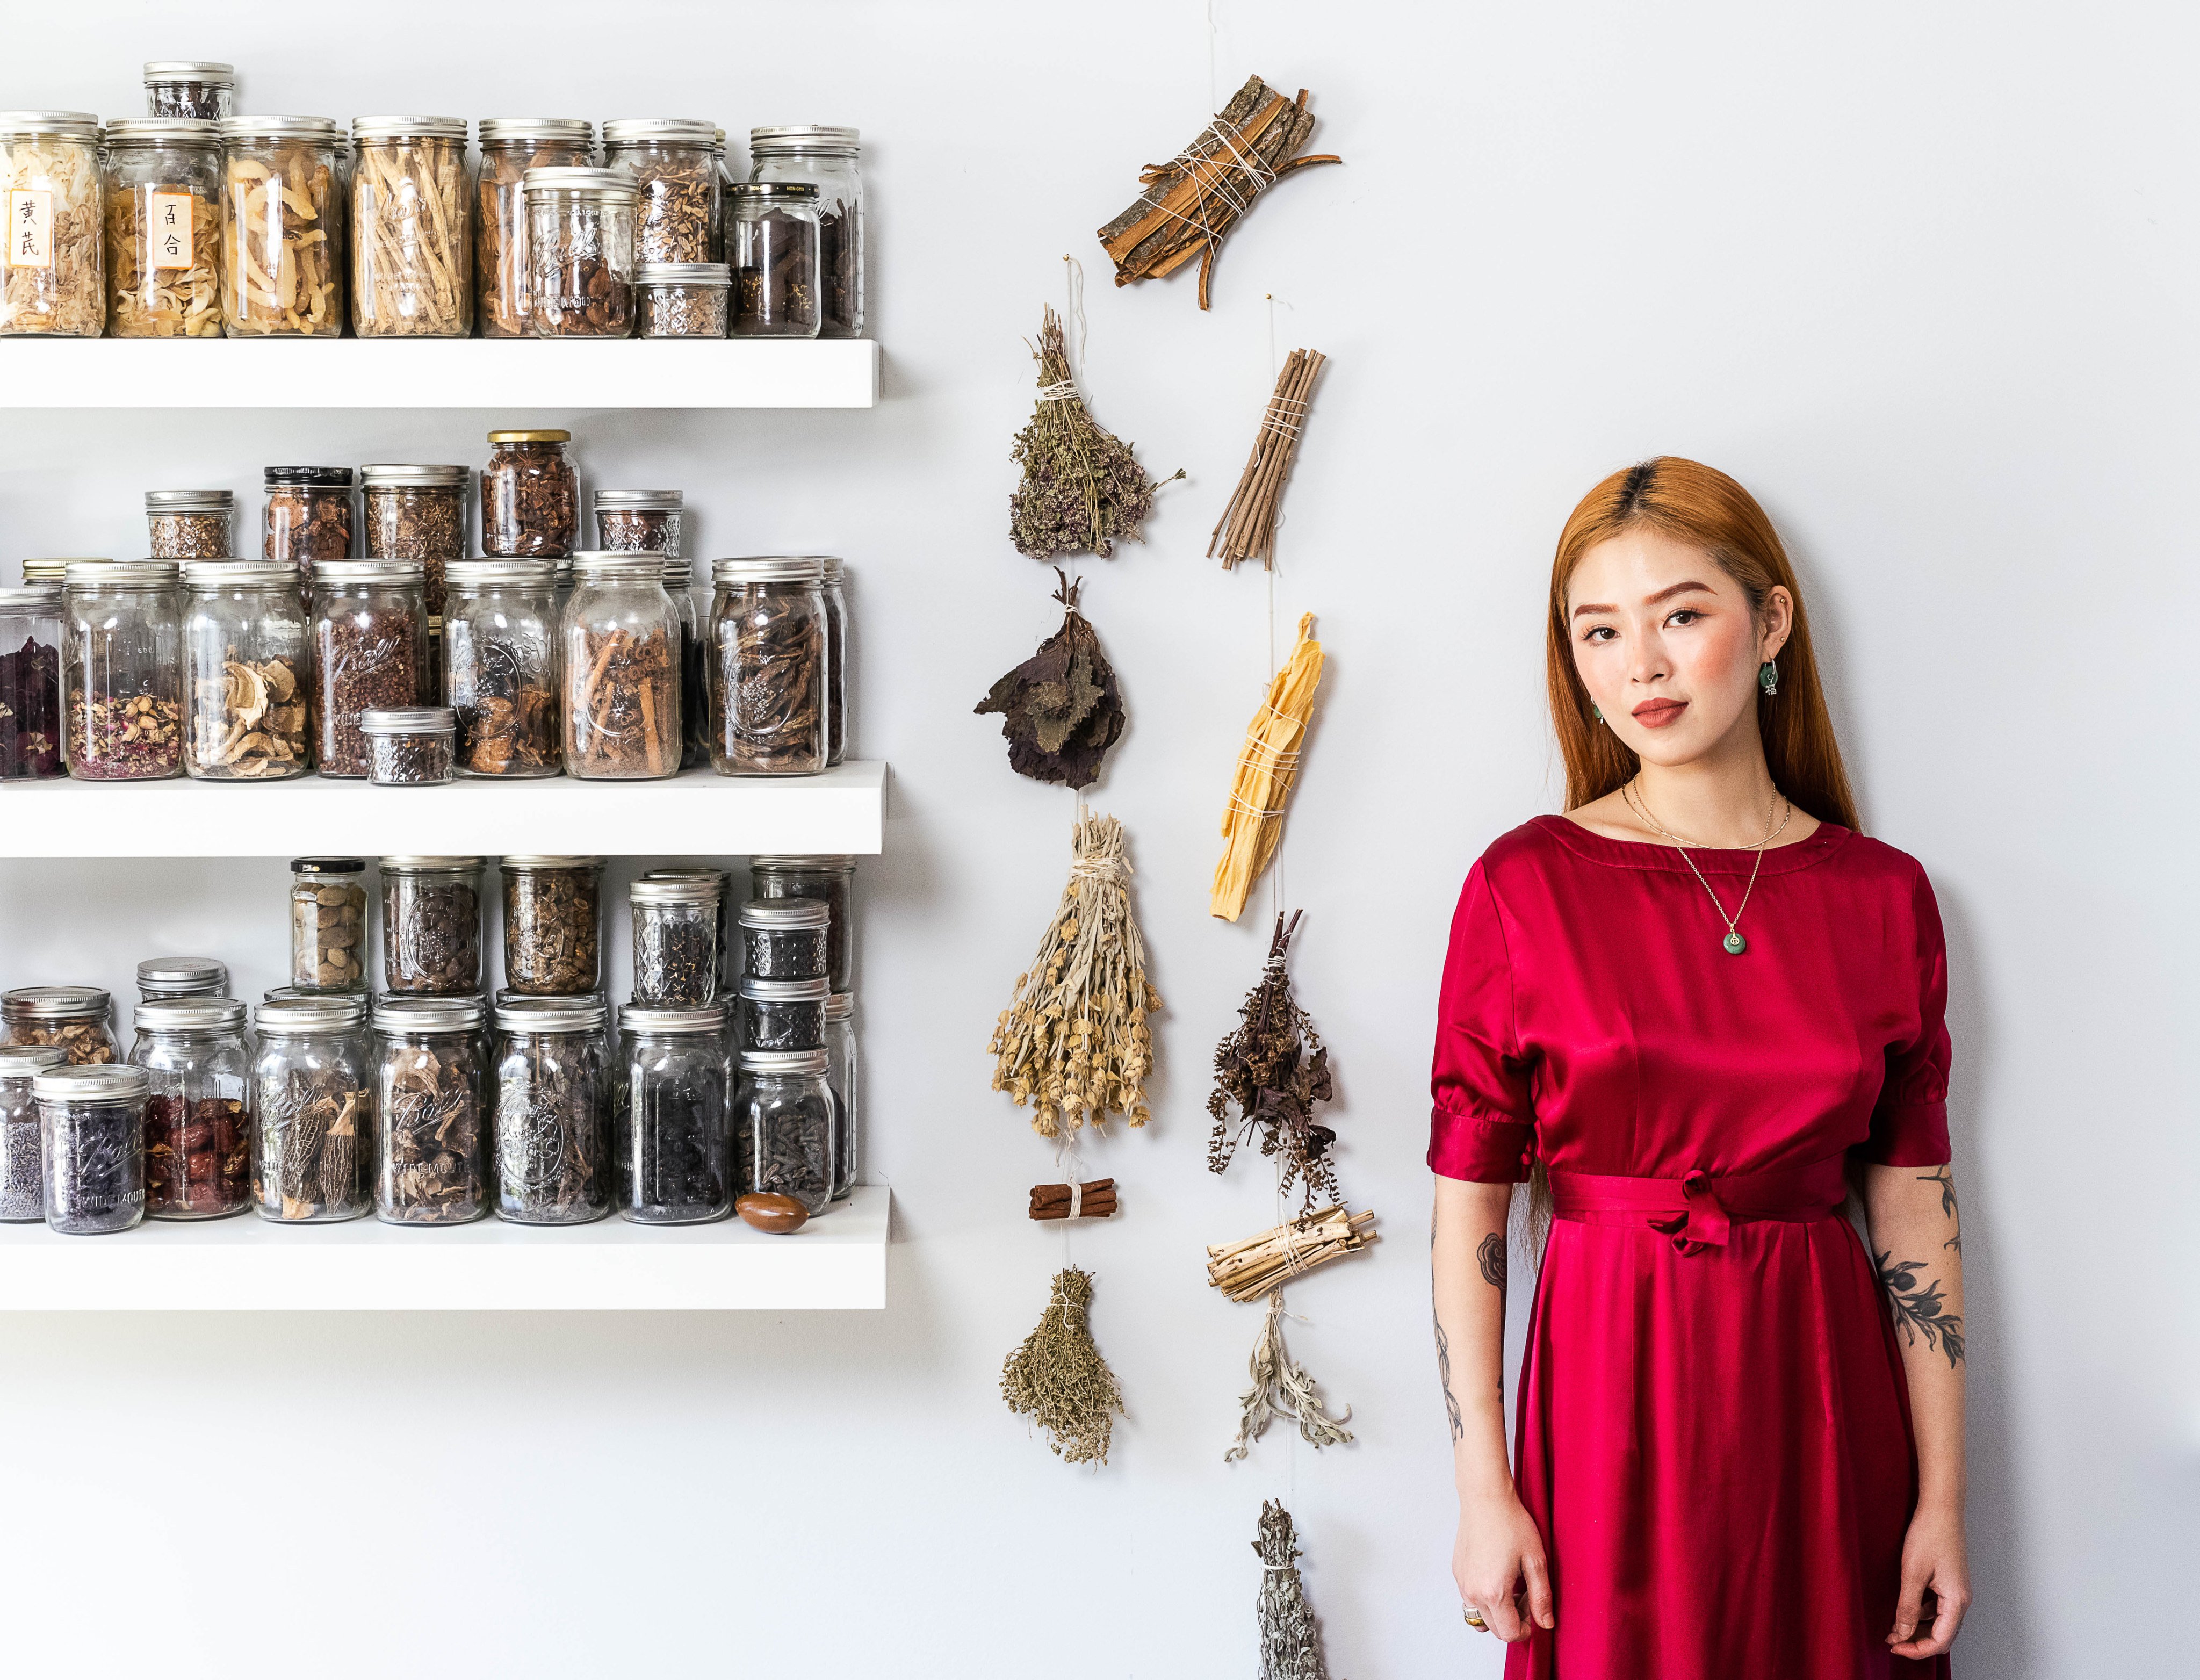 Zoey Gong is a TCM food therapist and registered dietitian. She talks about why she cooks using TCM principles and how it changed her life. Photo: Charissa Fay